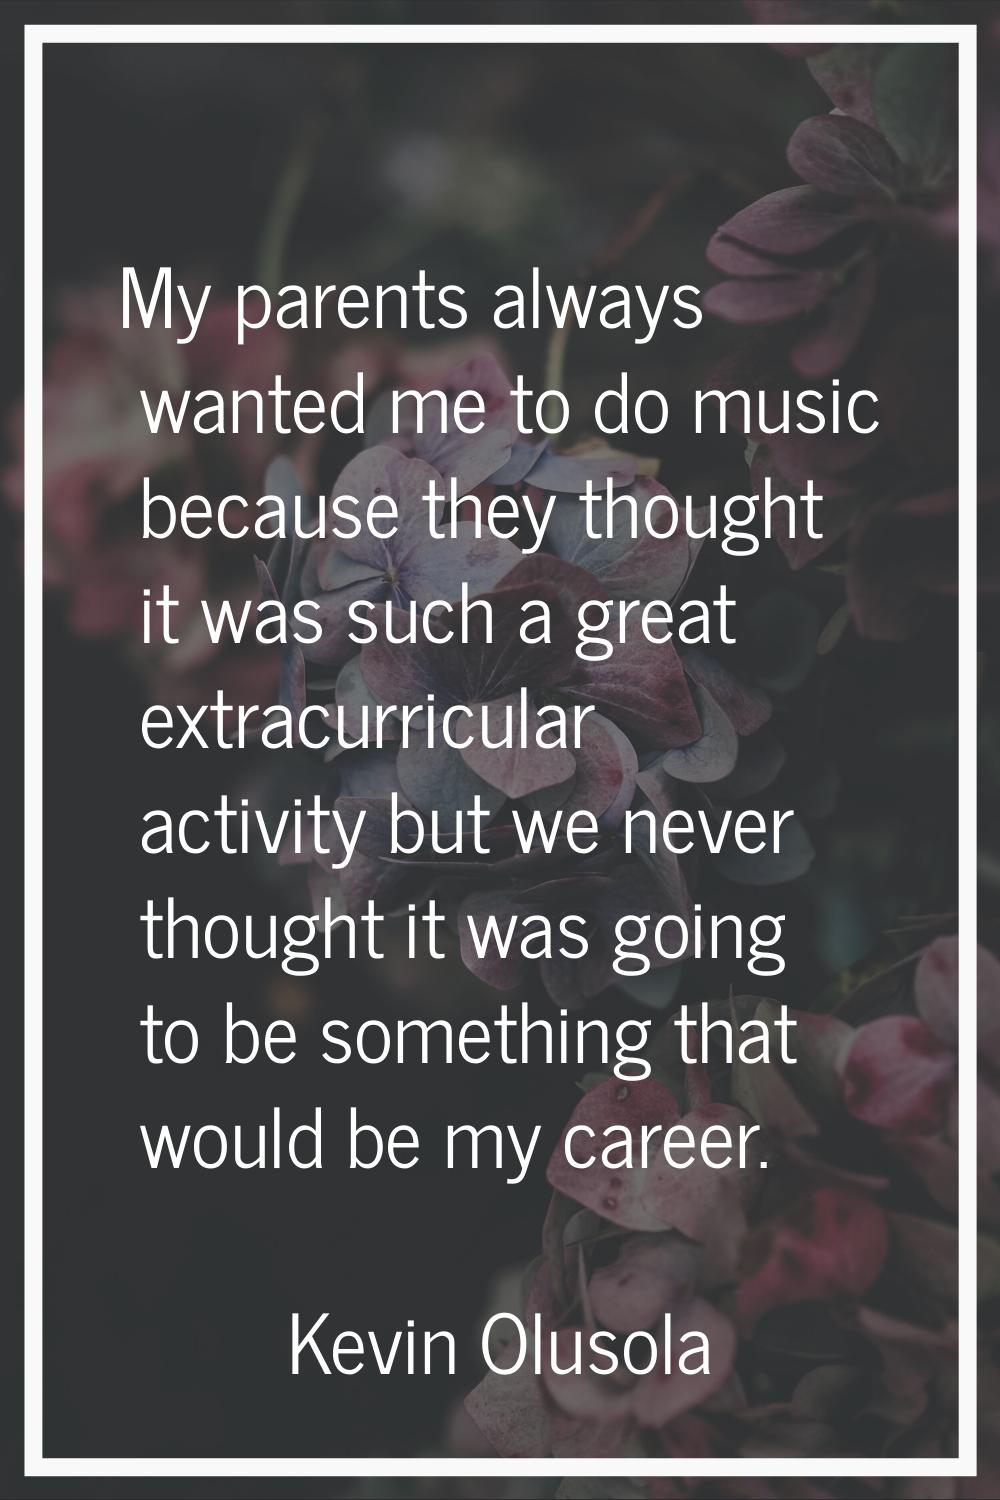 My parents always wanted me to do music because they thought it was such a great extracurricular ac